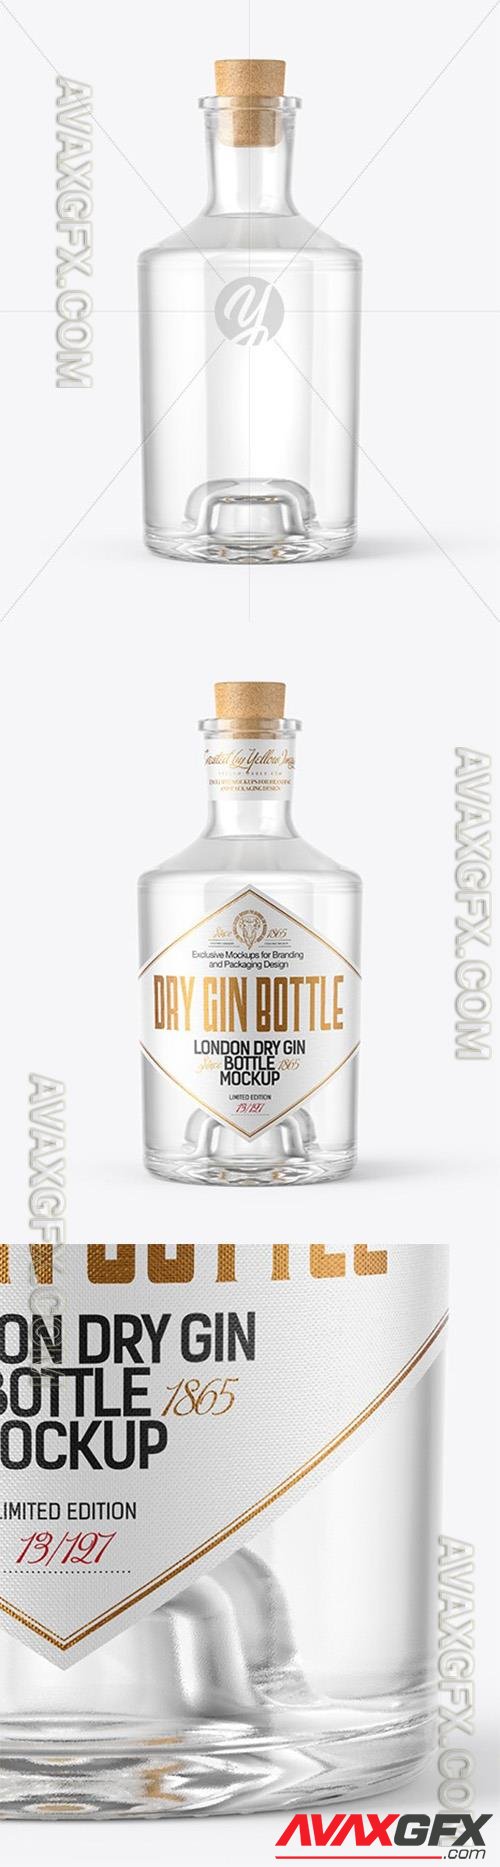 Dry Gin Bottle with Cork Mockup 45980 TIF